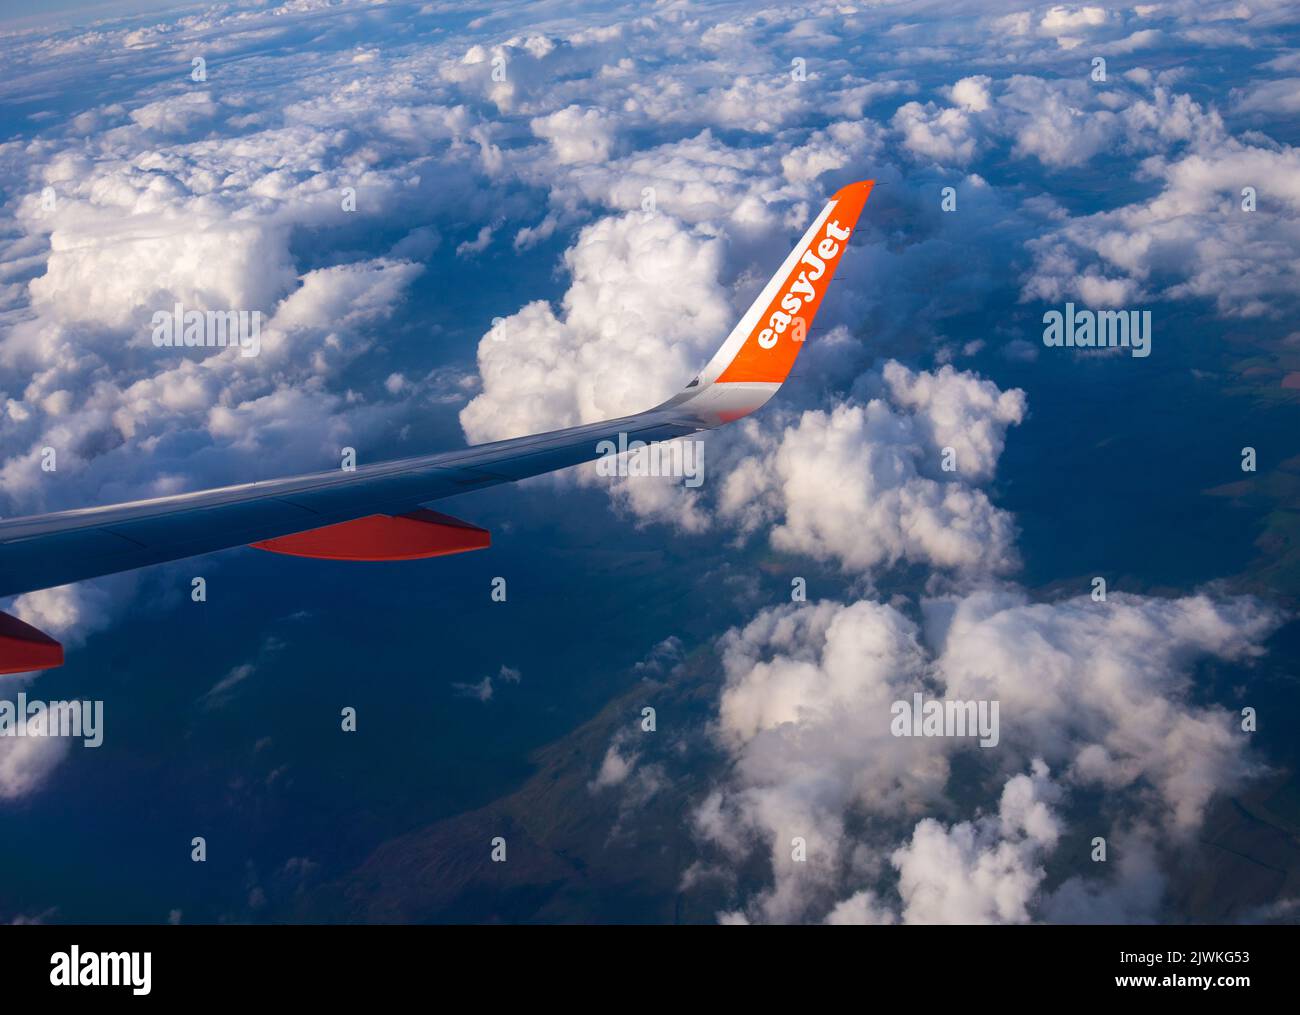 EasyJet Airbus A320 viewed from the rear of the passenger cabin while the aircraft is in flight Stock Photo